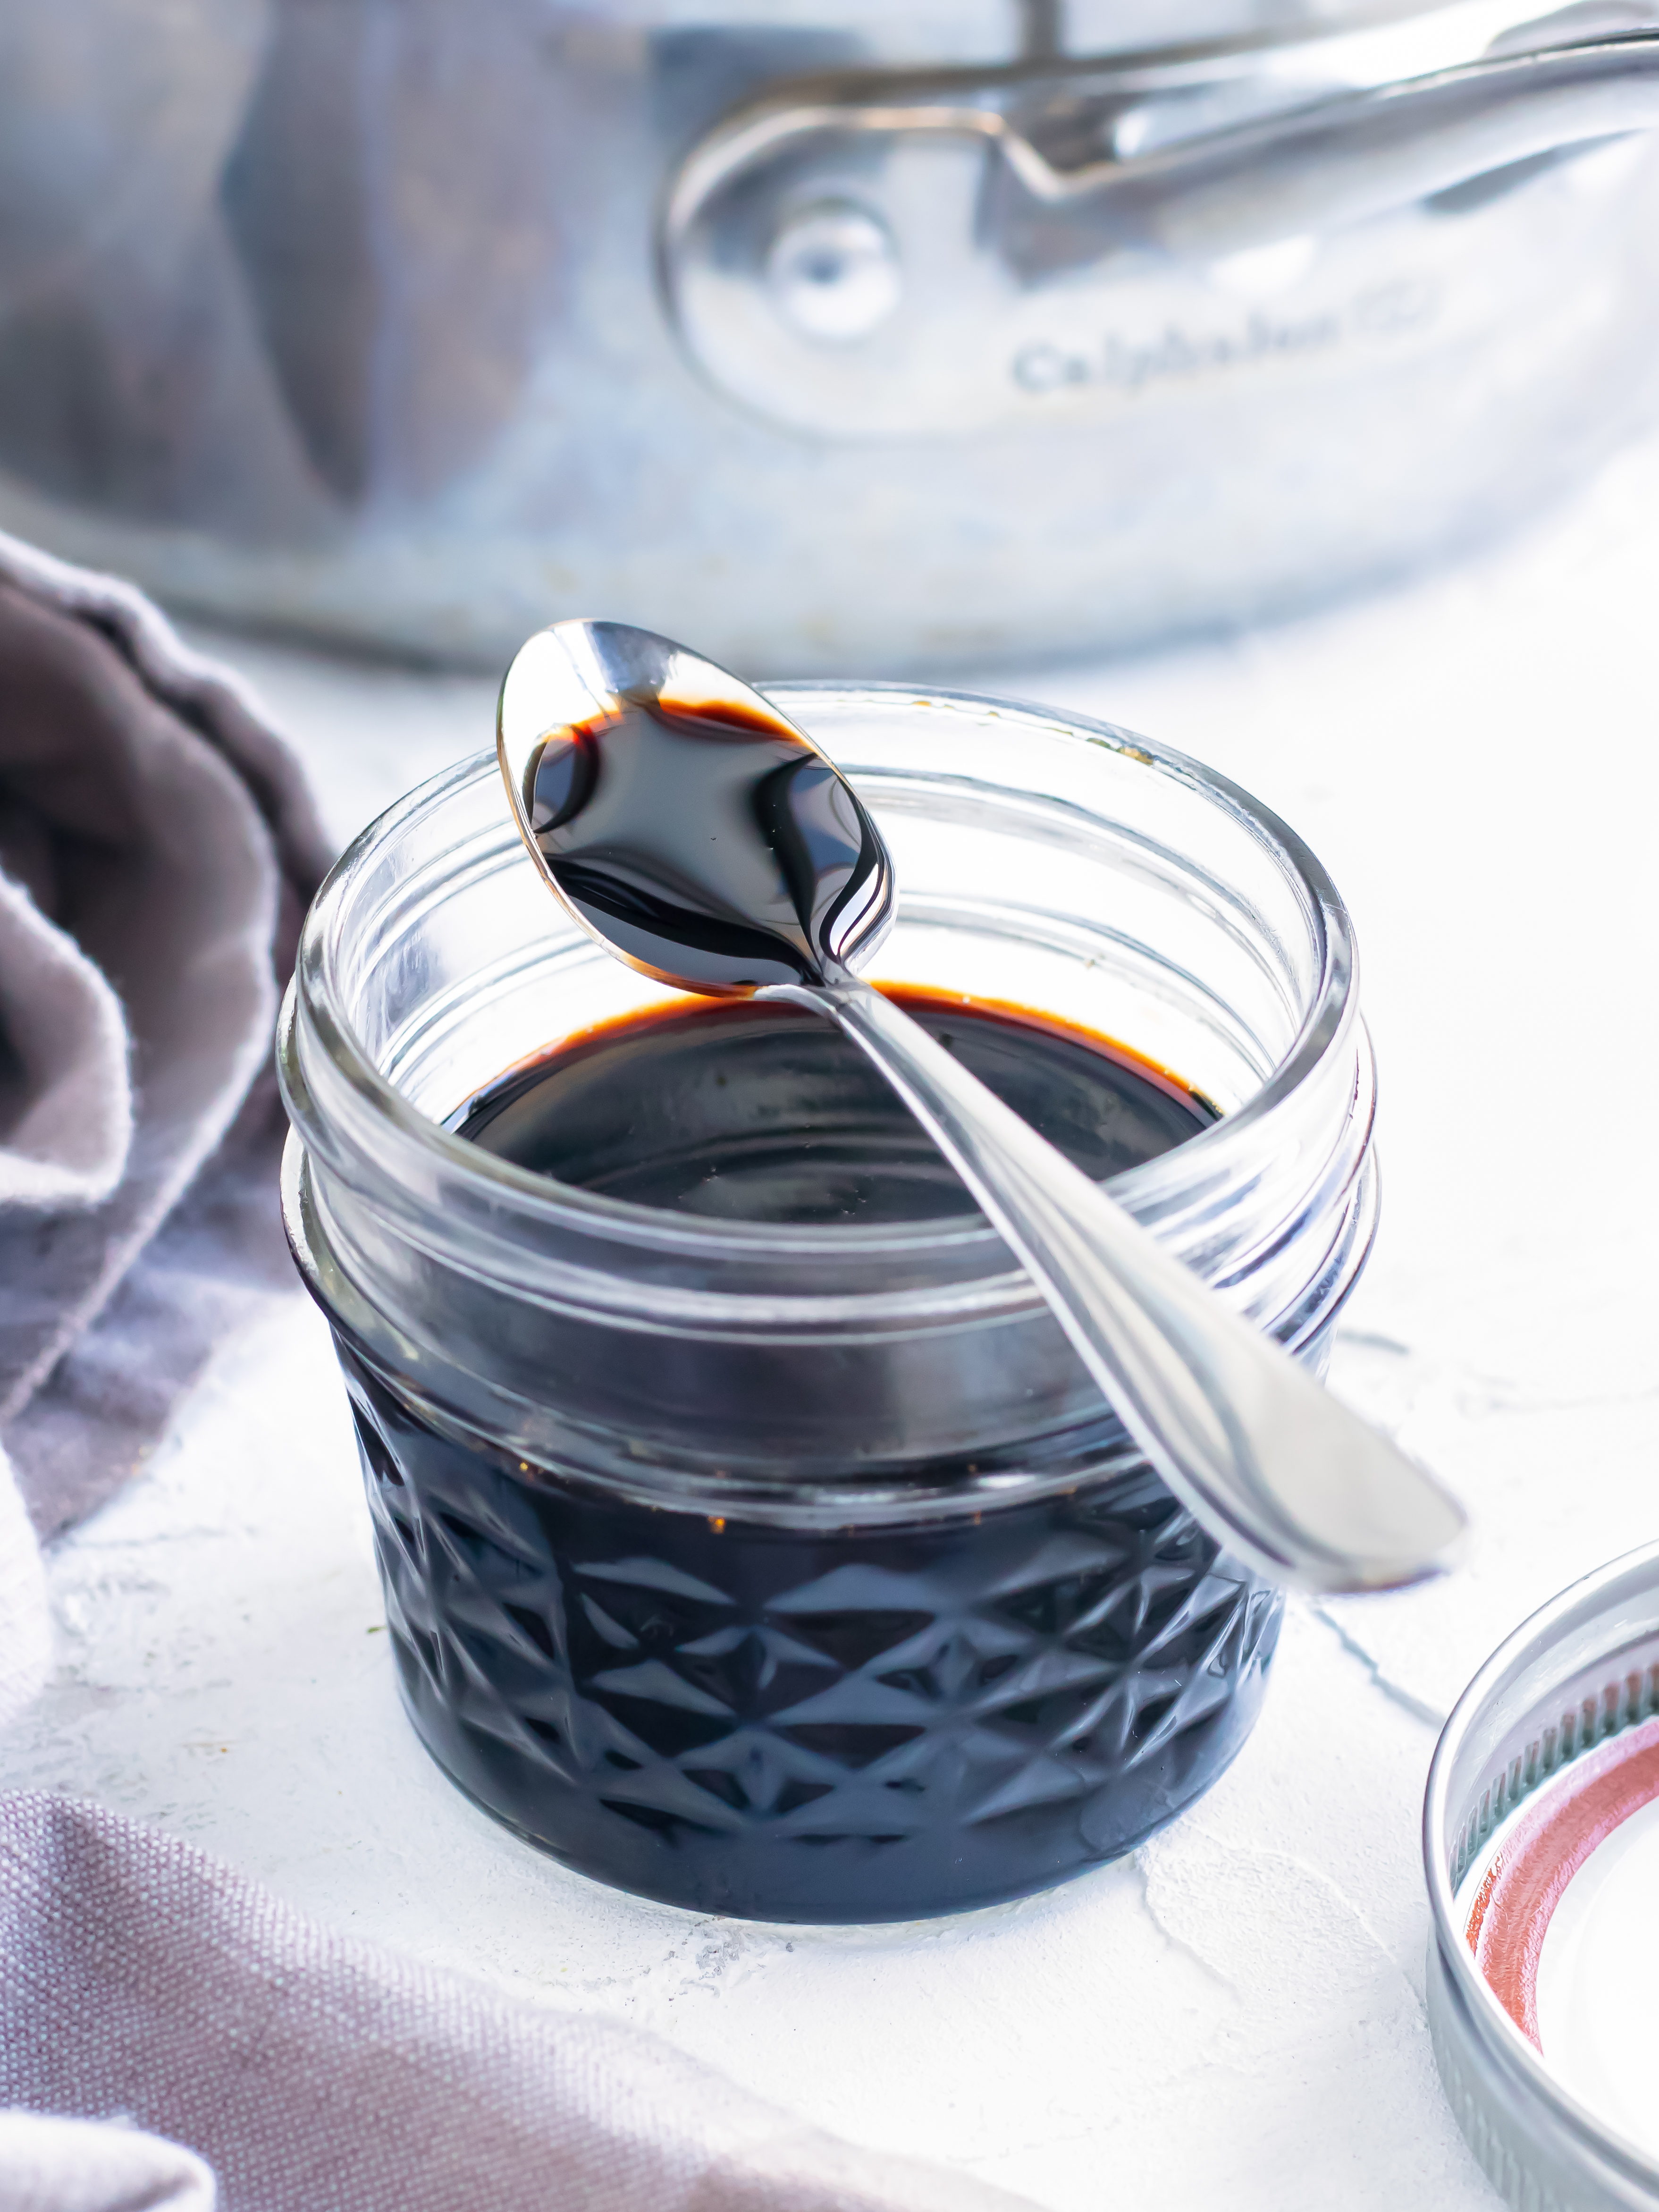 Balsamic reduction recipe in a clear mason jar with a spoon.